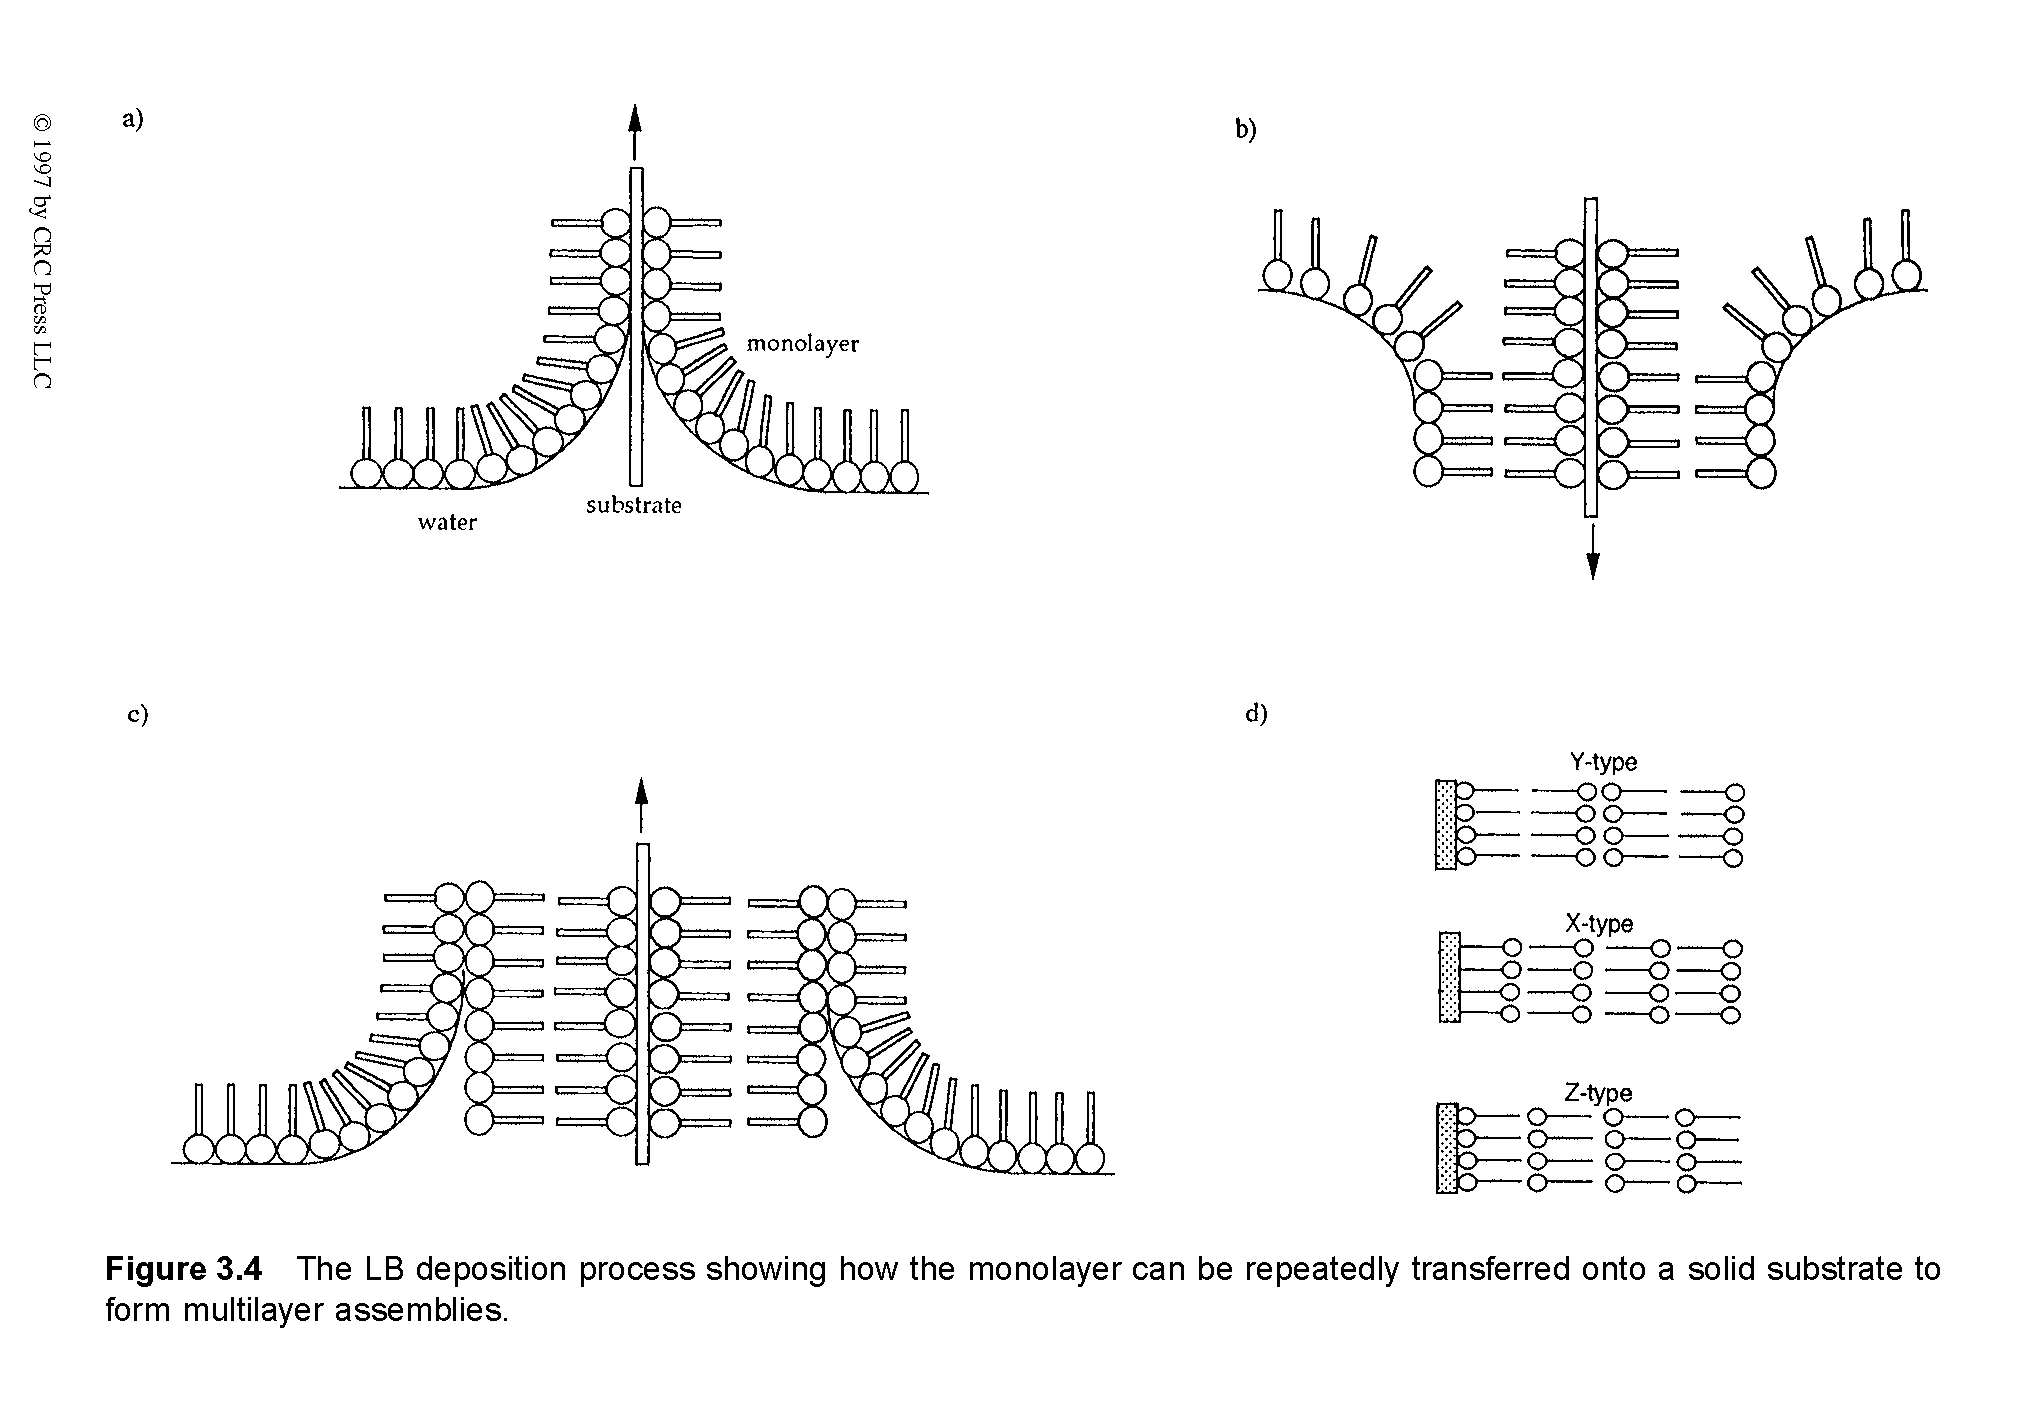 Figure 3.4 The LB deposition process showing how the monolayer can be repeatedly transferred onto a solid substrate to form multilayer assemblies.